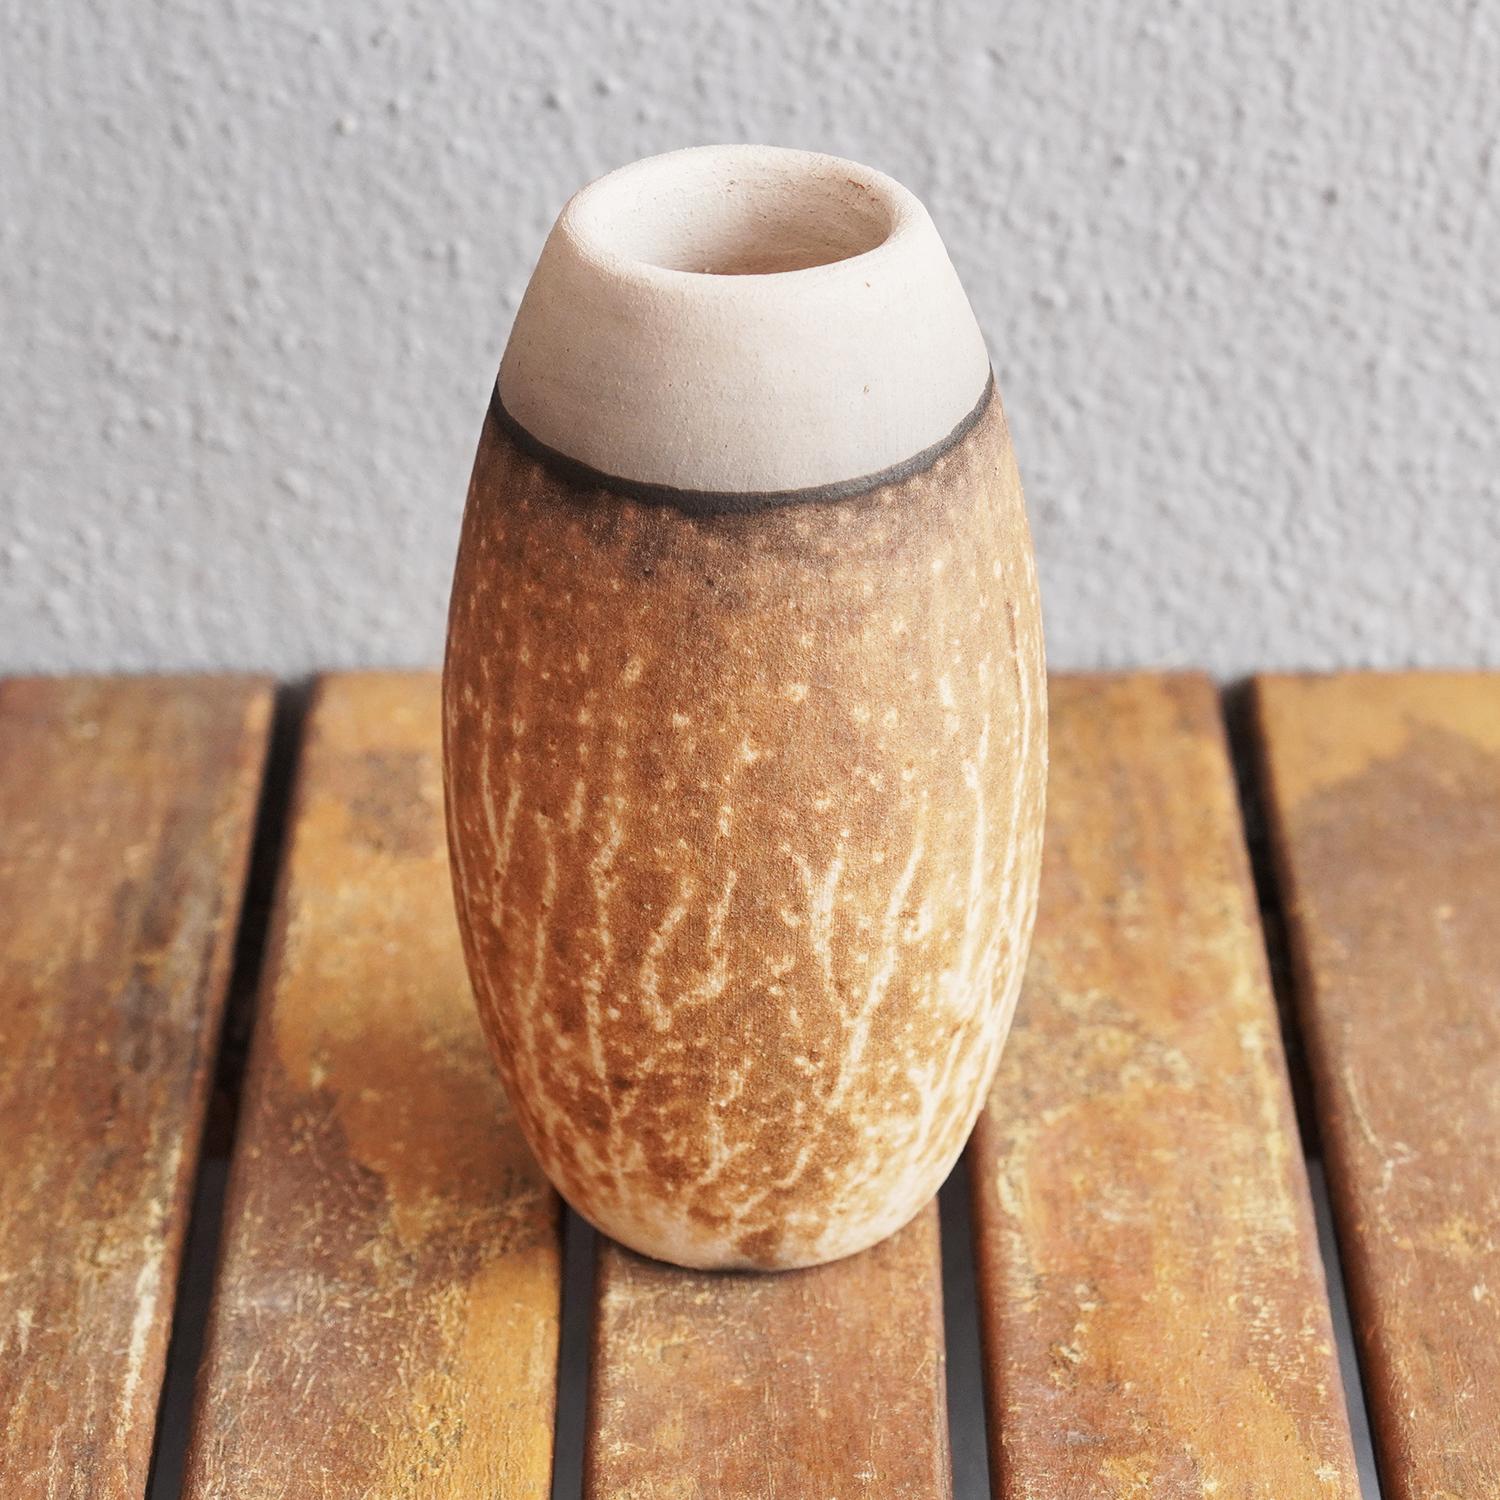 Tsuri ( ツリー ) ~ (n) tree

Our Tsuri vase is based on the classic bottle shape but with a wider mouth at the top. It would definitely look great when put together with other RAAQUU BASICS vases.

You could decorate your space with the Tsuri vase as